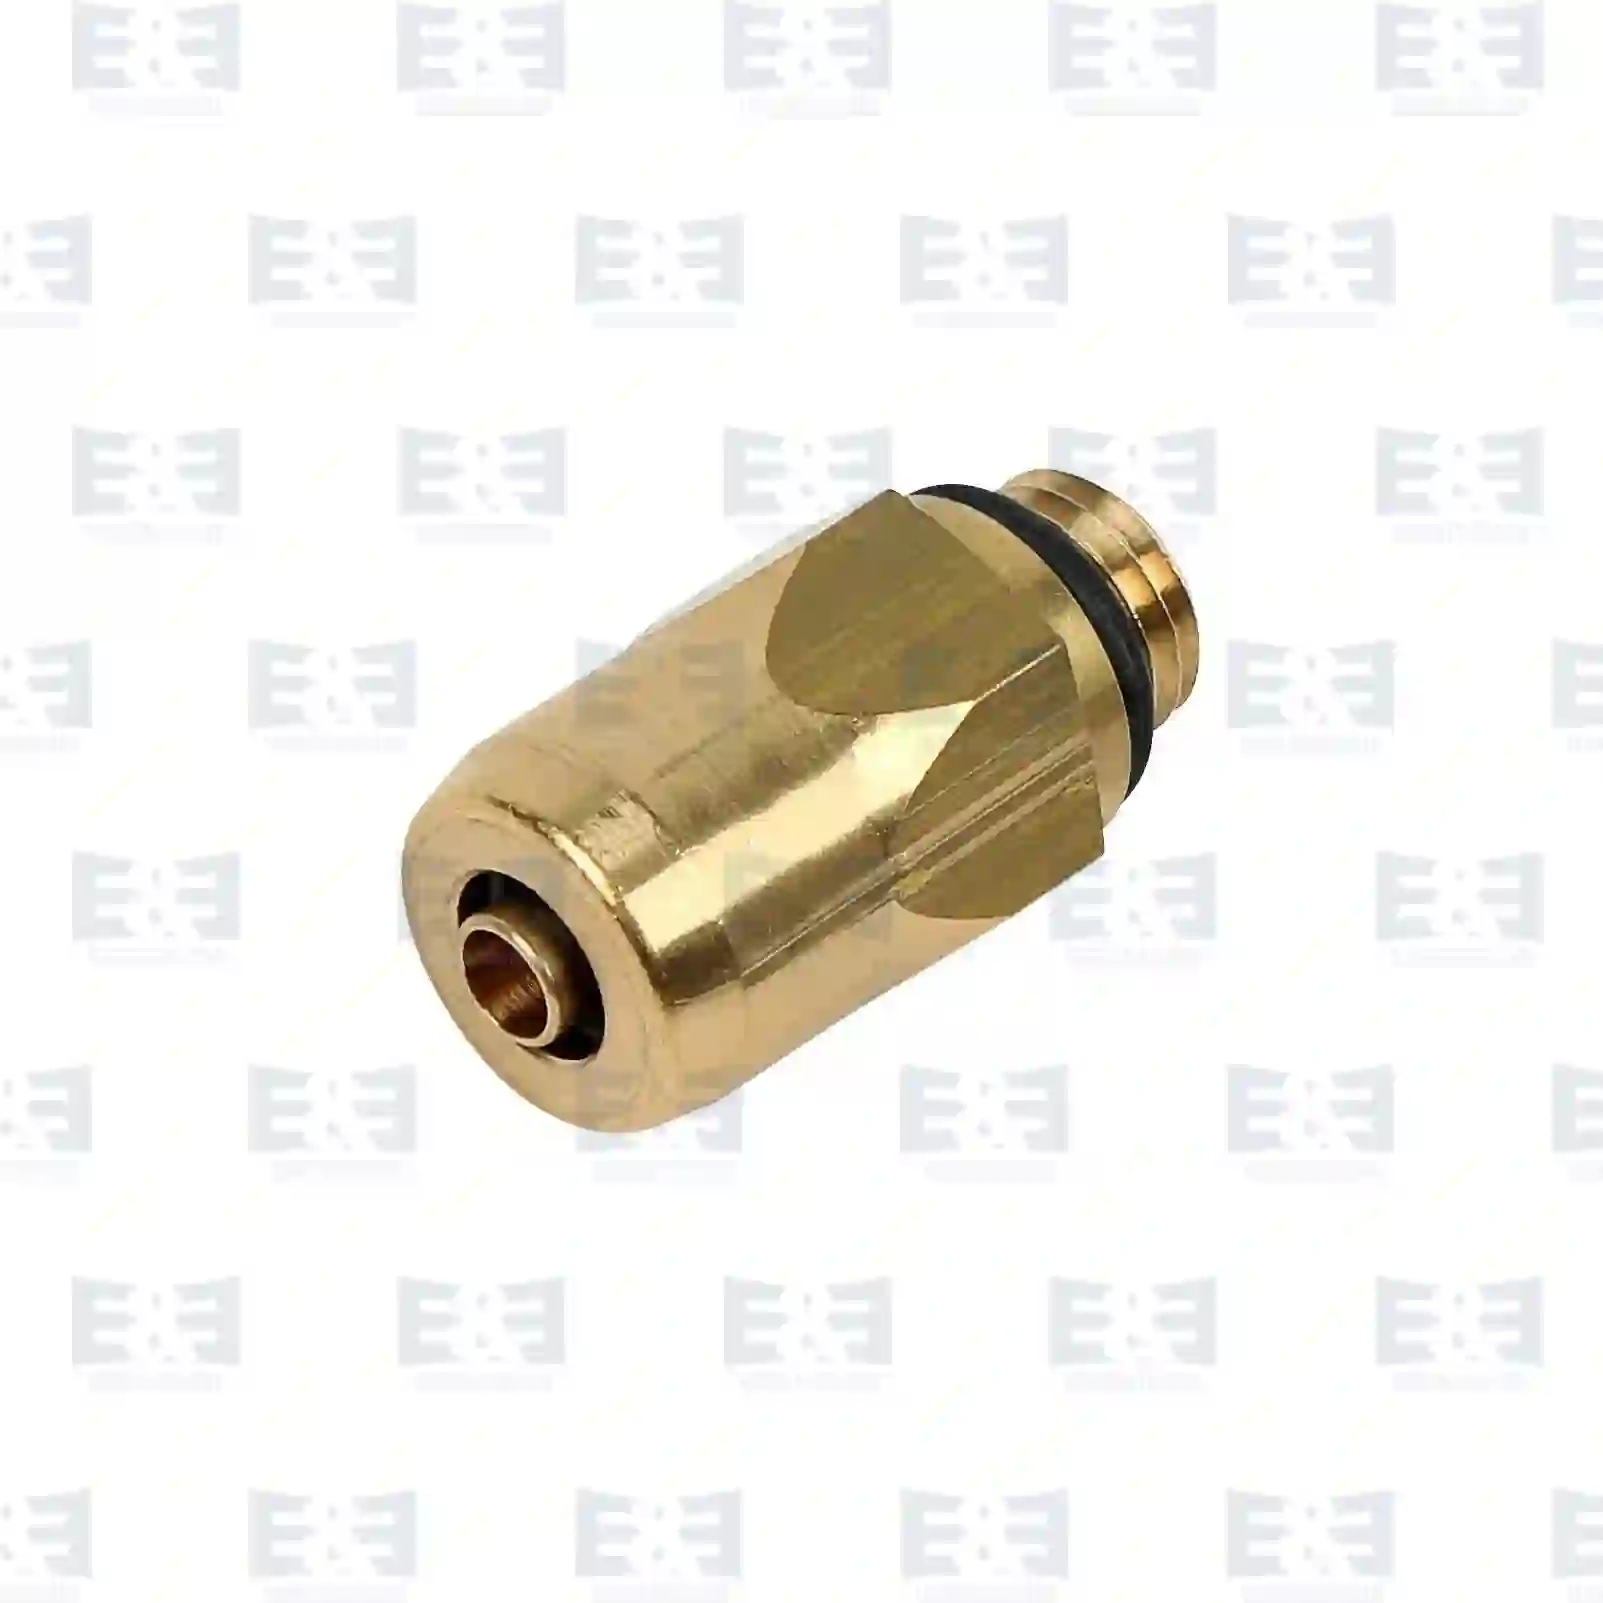  Push-in-connector || E&E Truck Spare Parts | Truck Spare Parts, Auotomotive Spare Parts